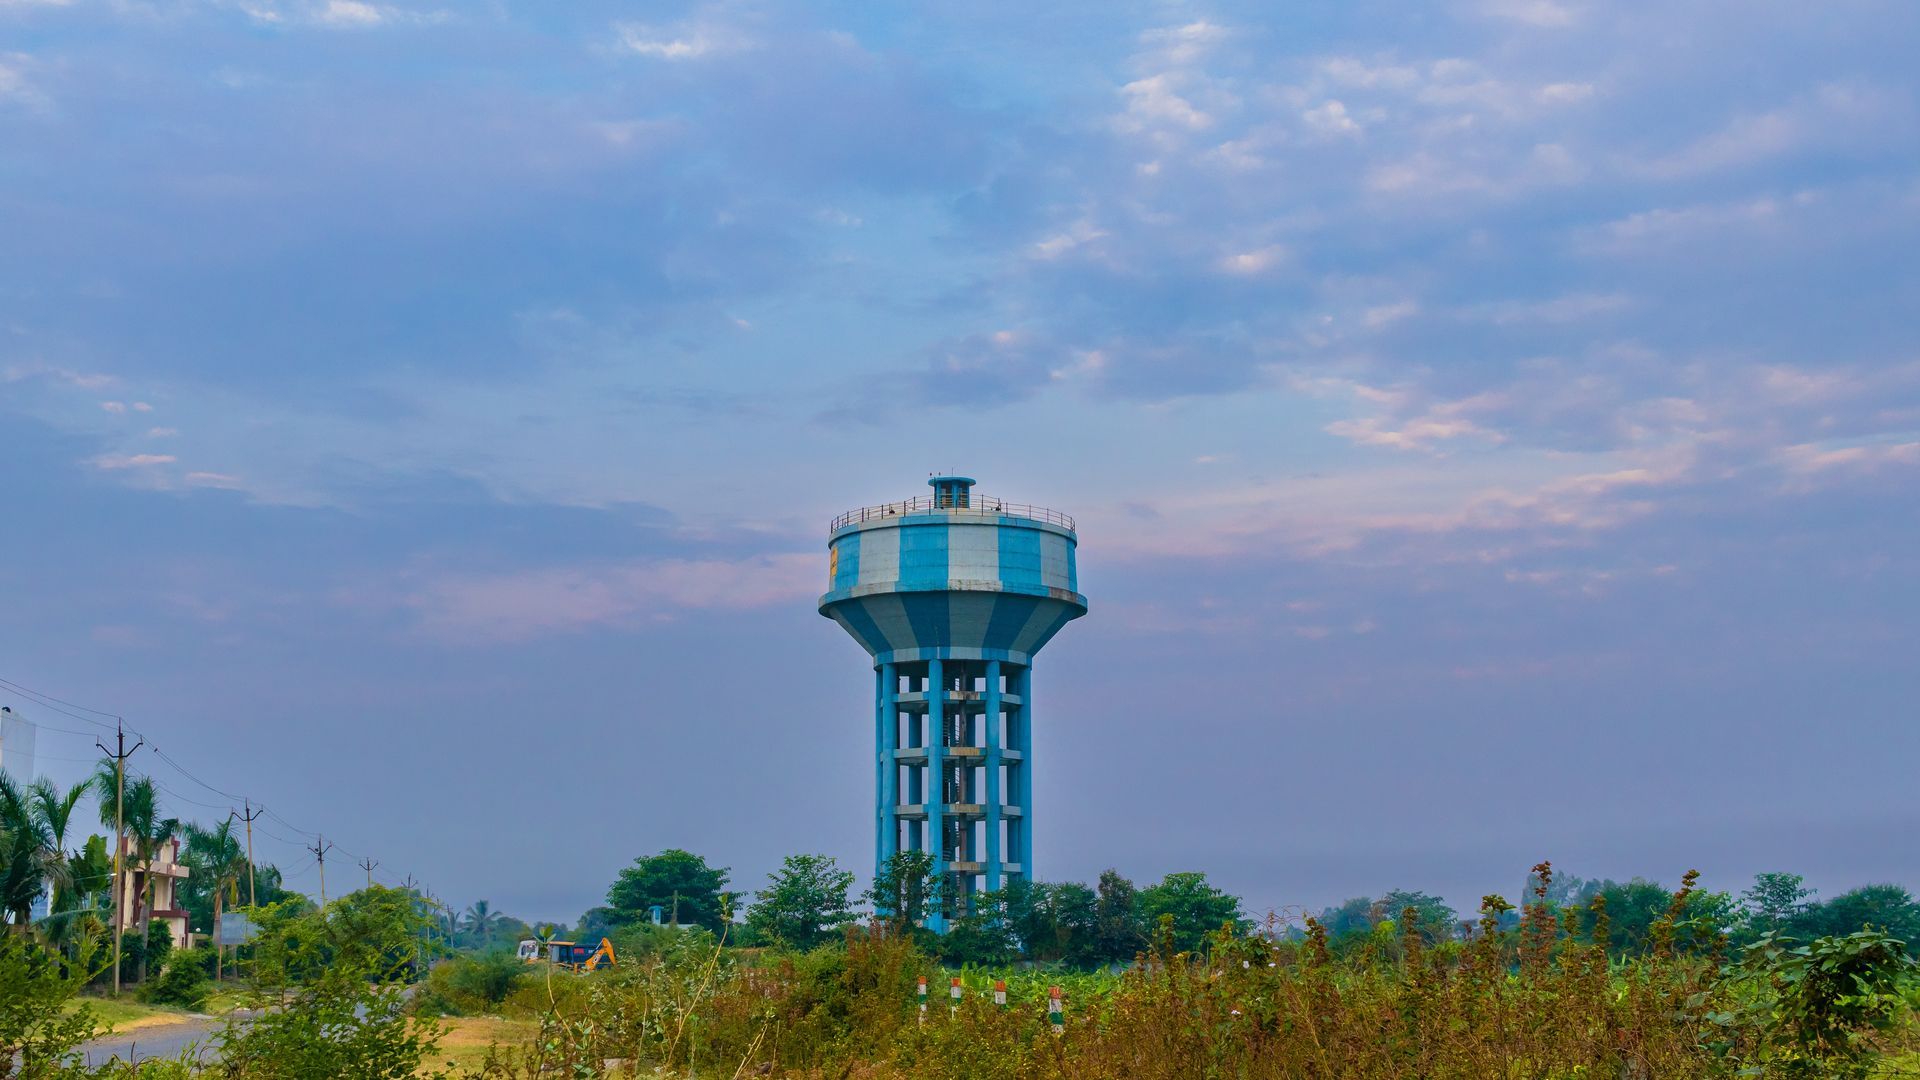 Water towers are sued to store public water supply.